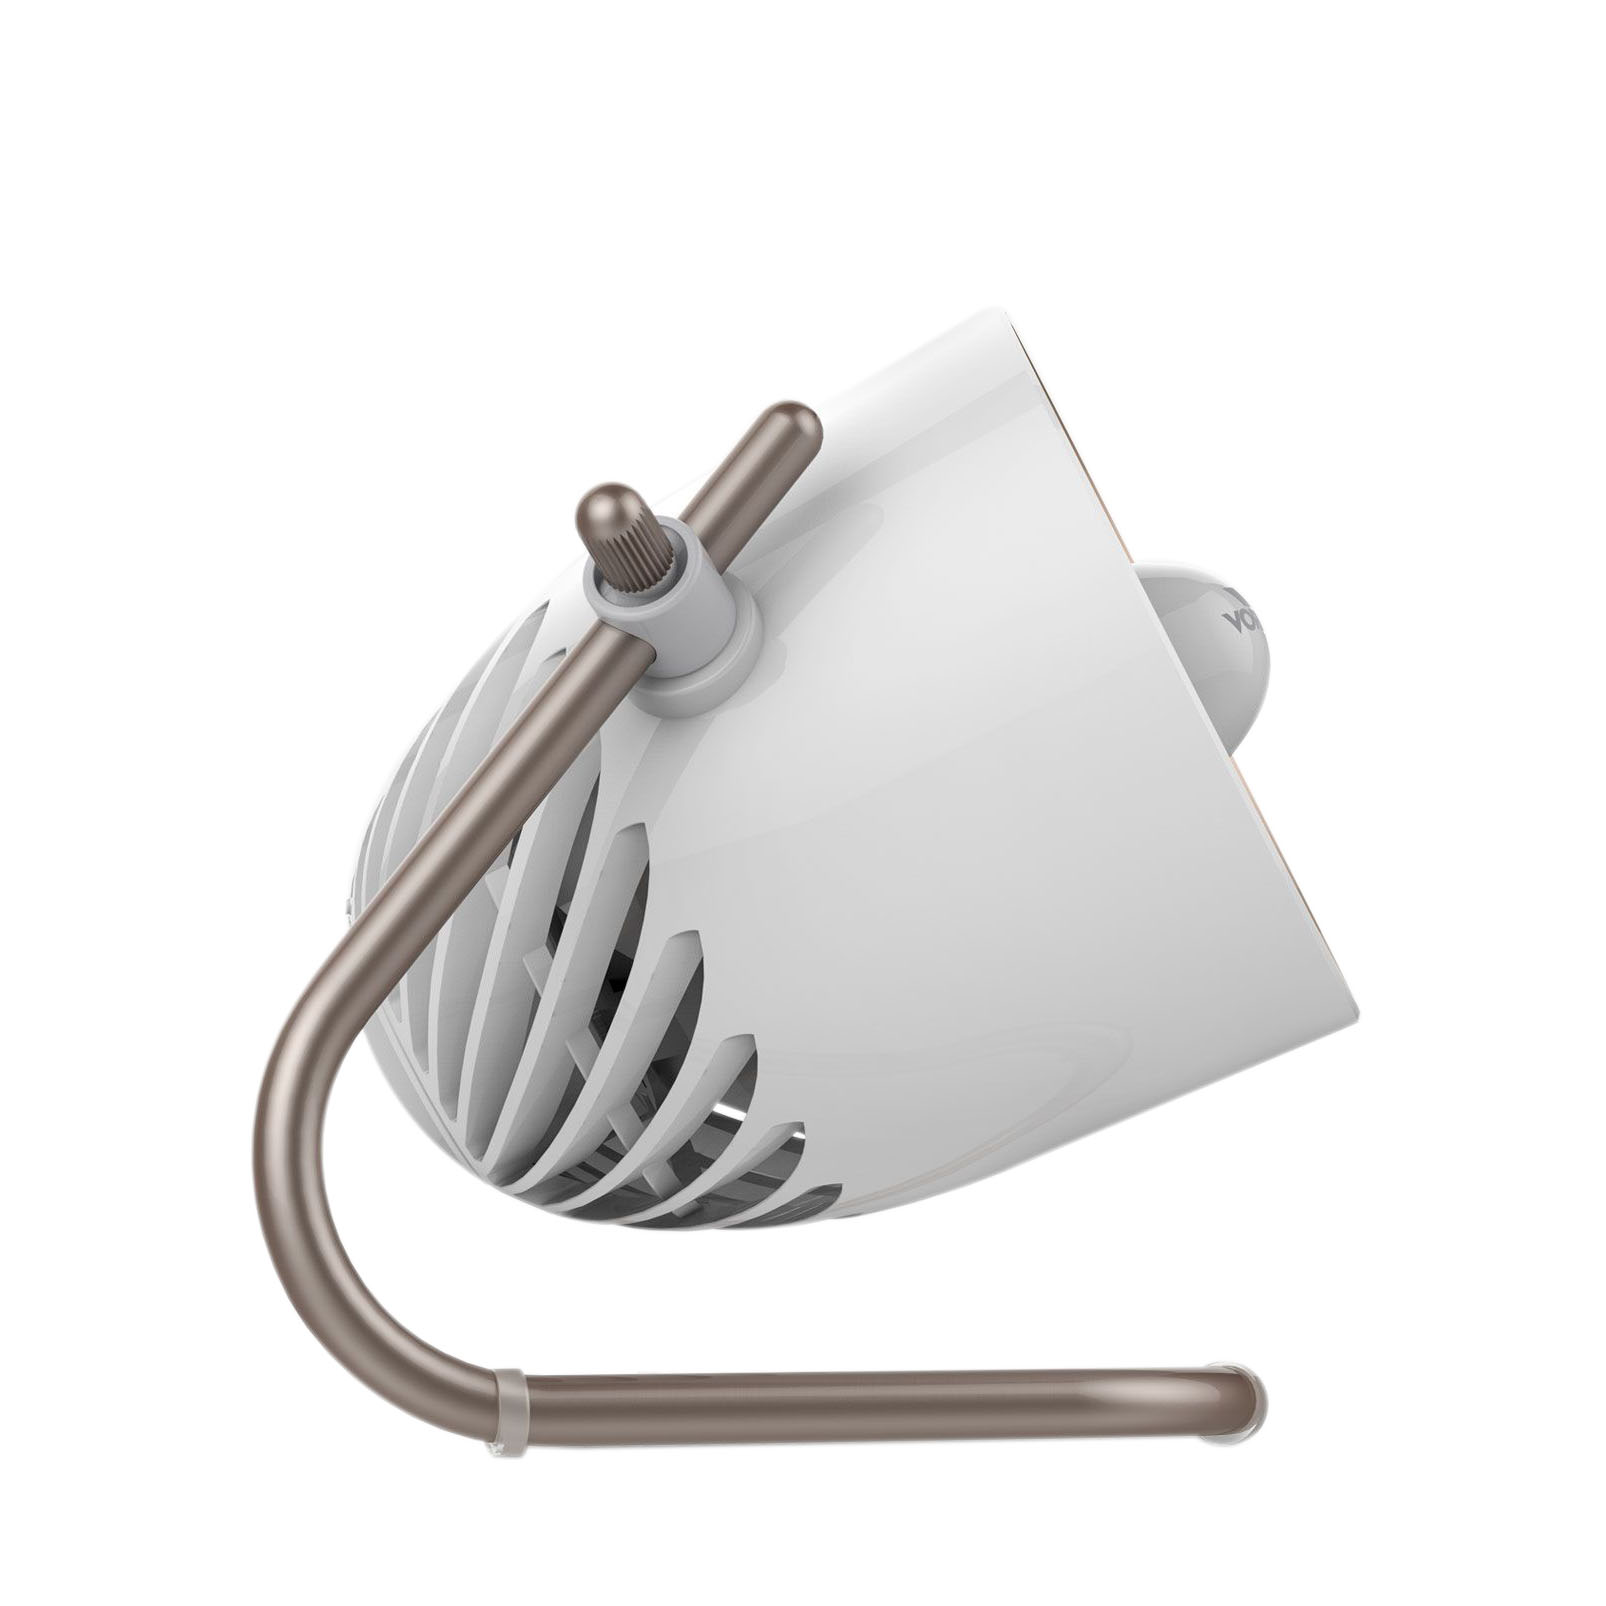 Vornado Pivot Desk Fan: Powerful, Quiet, and Stylish Fan with a Range of up to 3 m